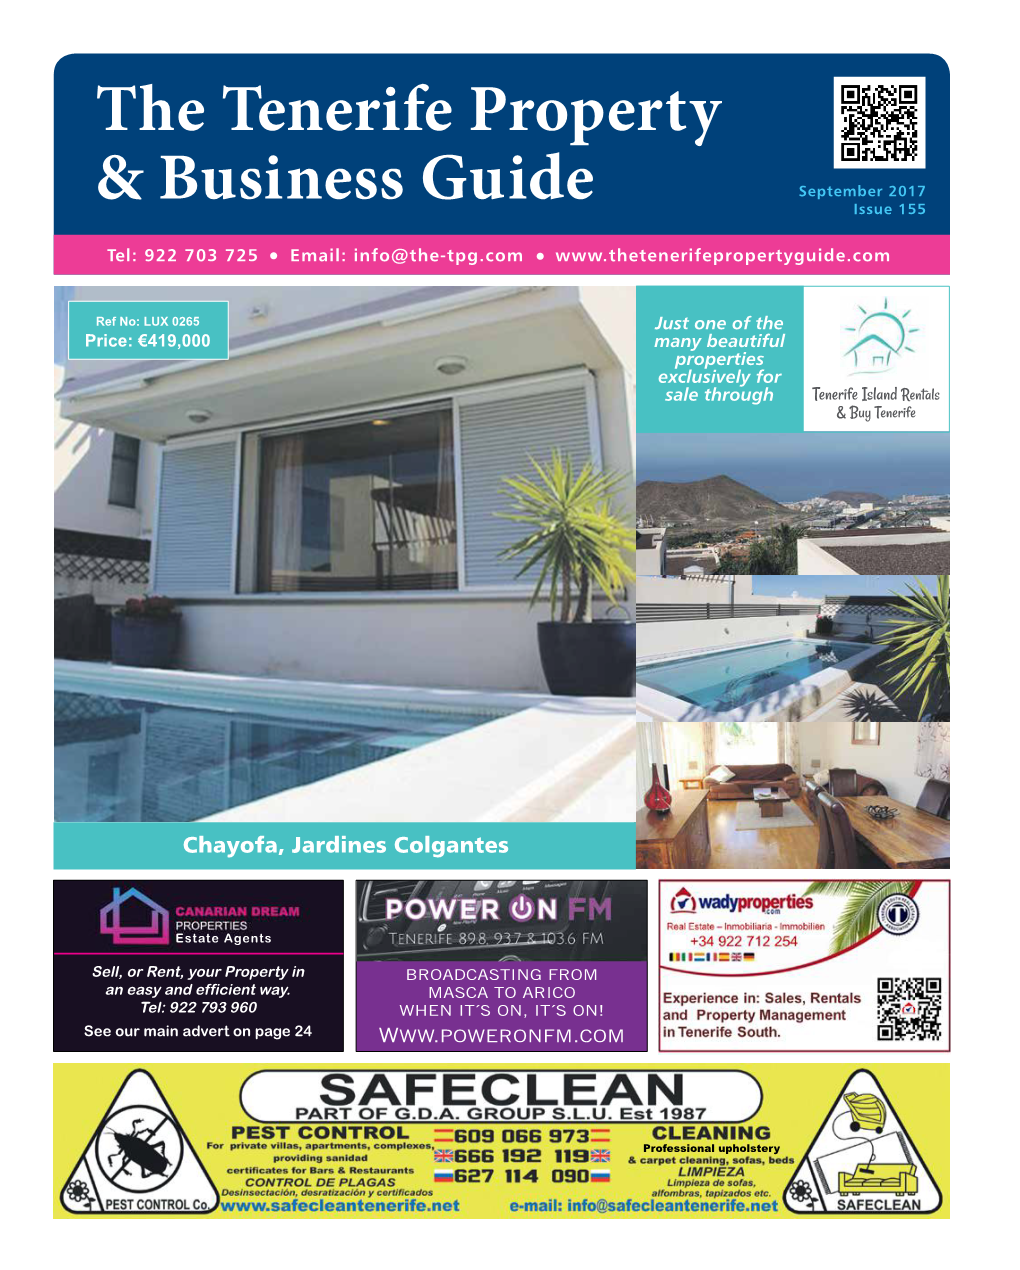 The Tenerife Property & Business Guide